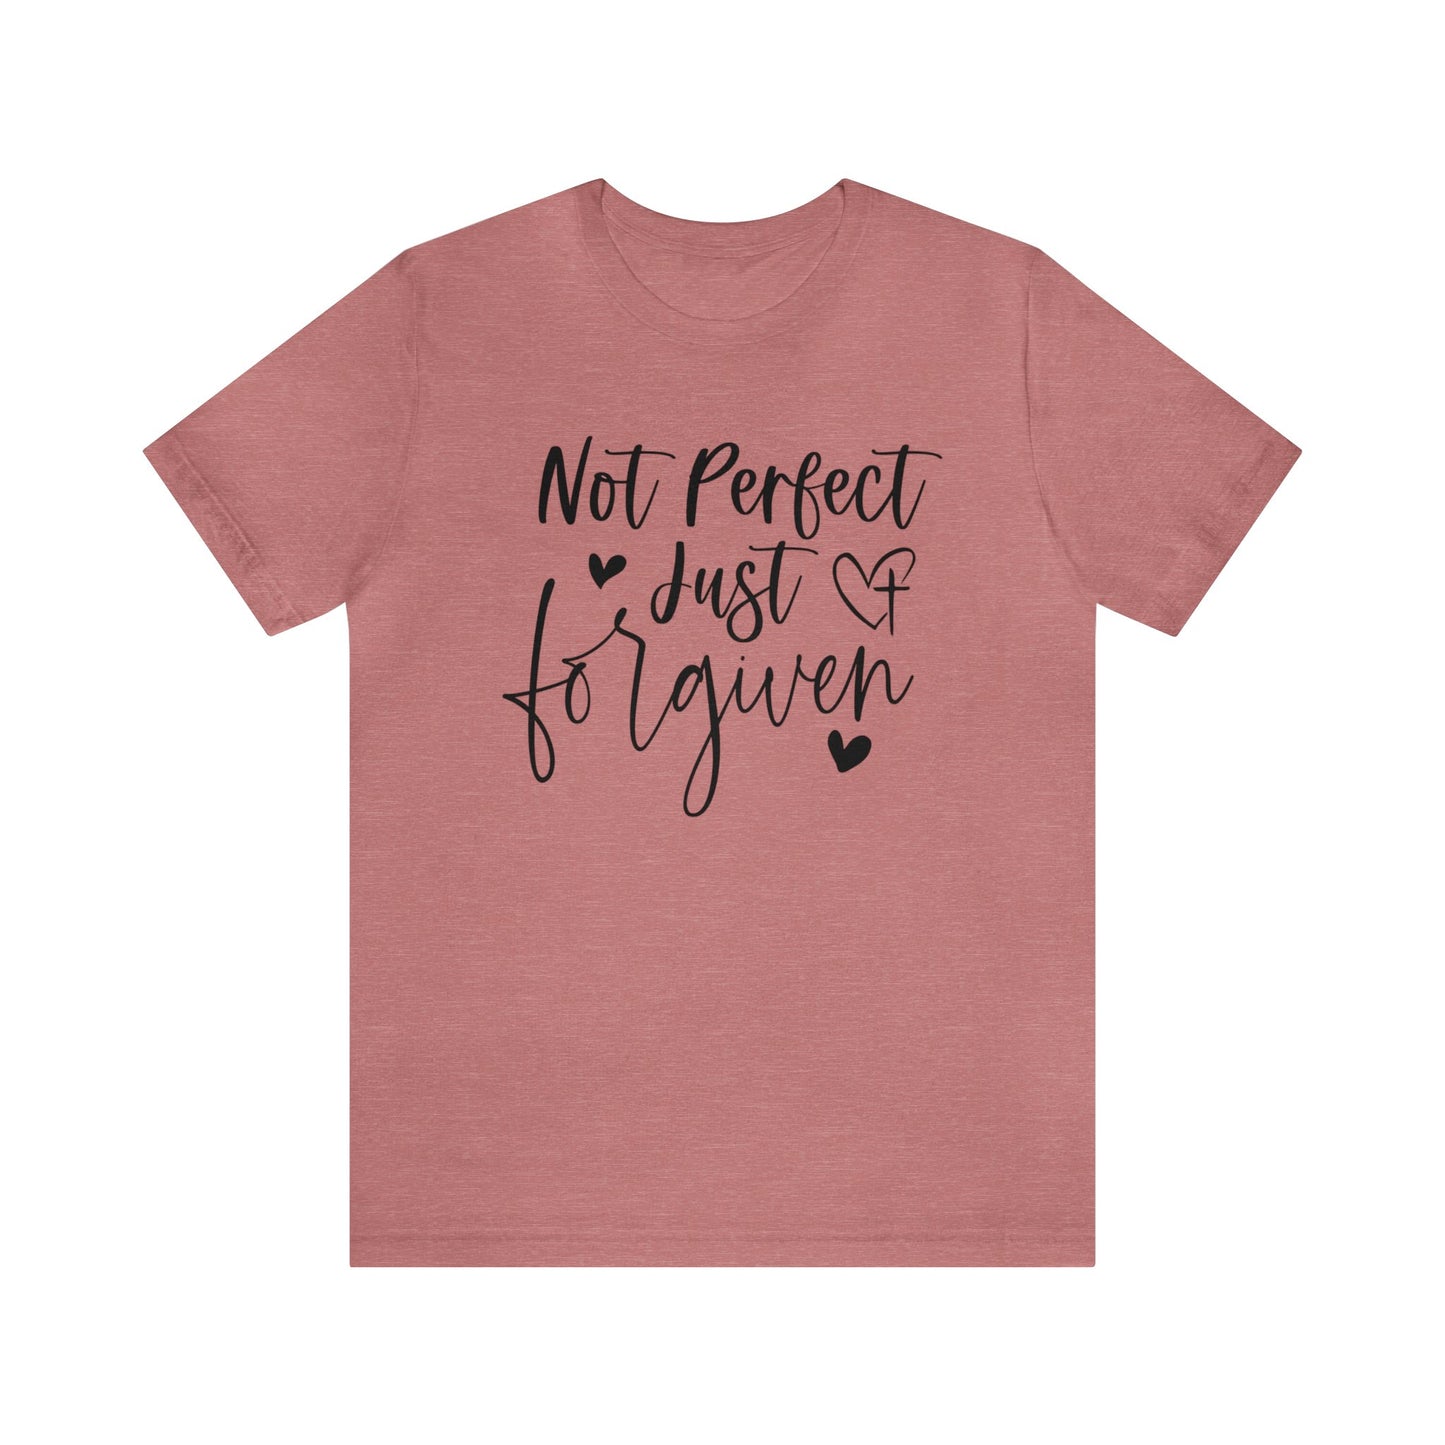 Not Perfect Just Forgiven - Short Sleeve Tee